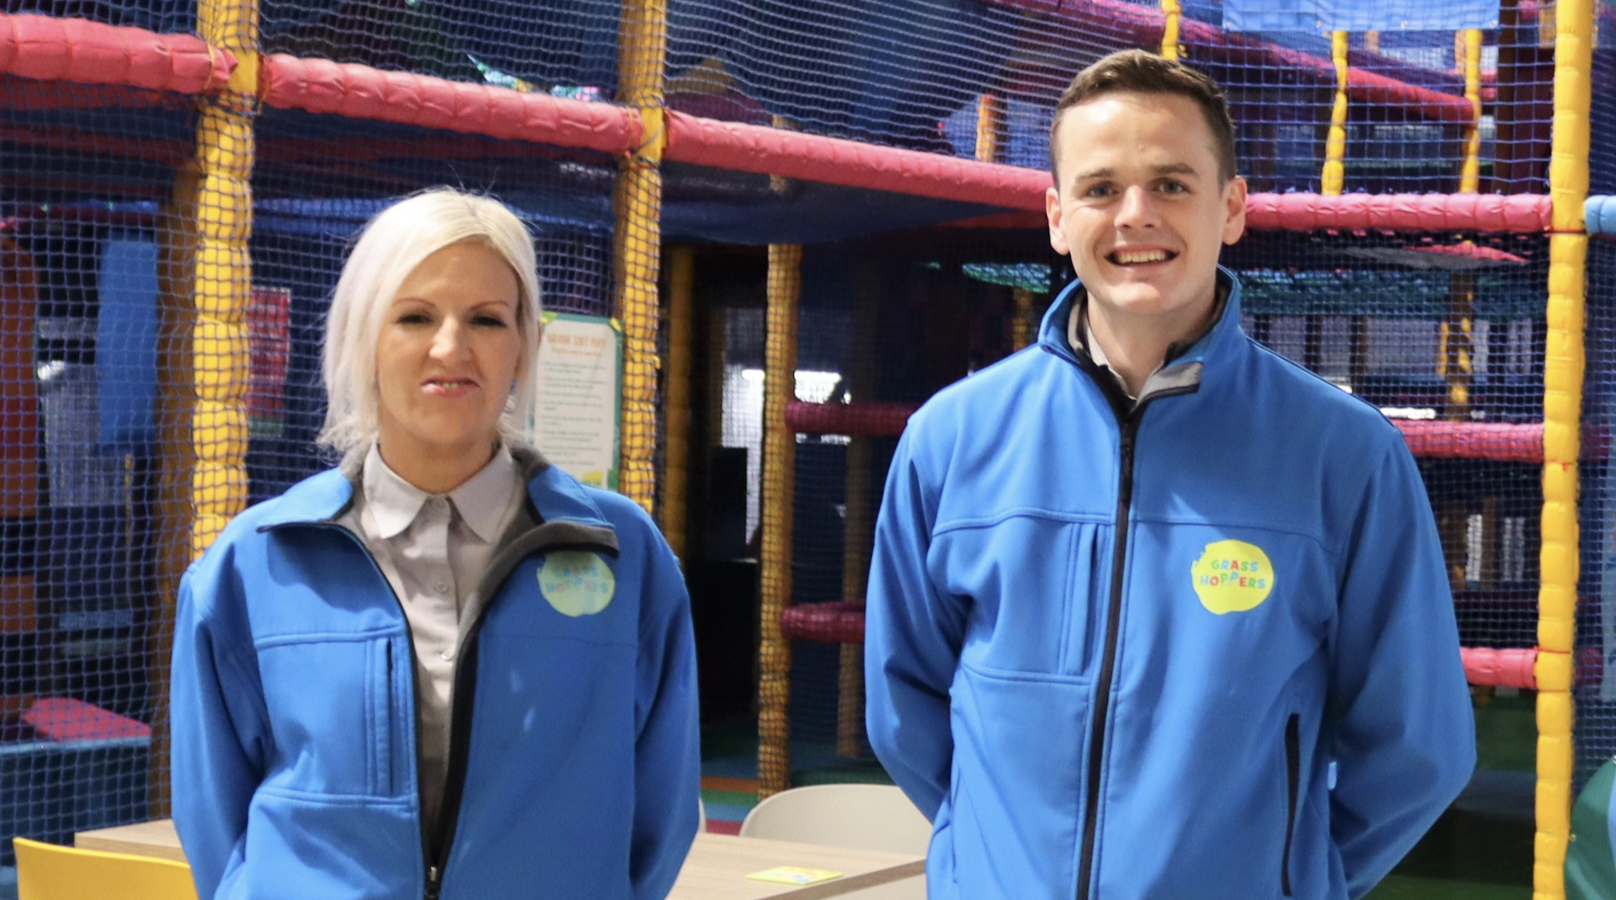 The play area at Bradford garden centre is shortlisted for a regional tourism award